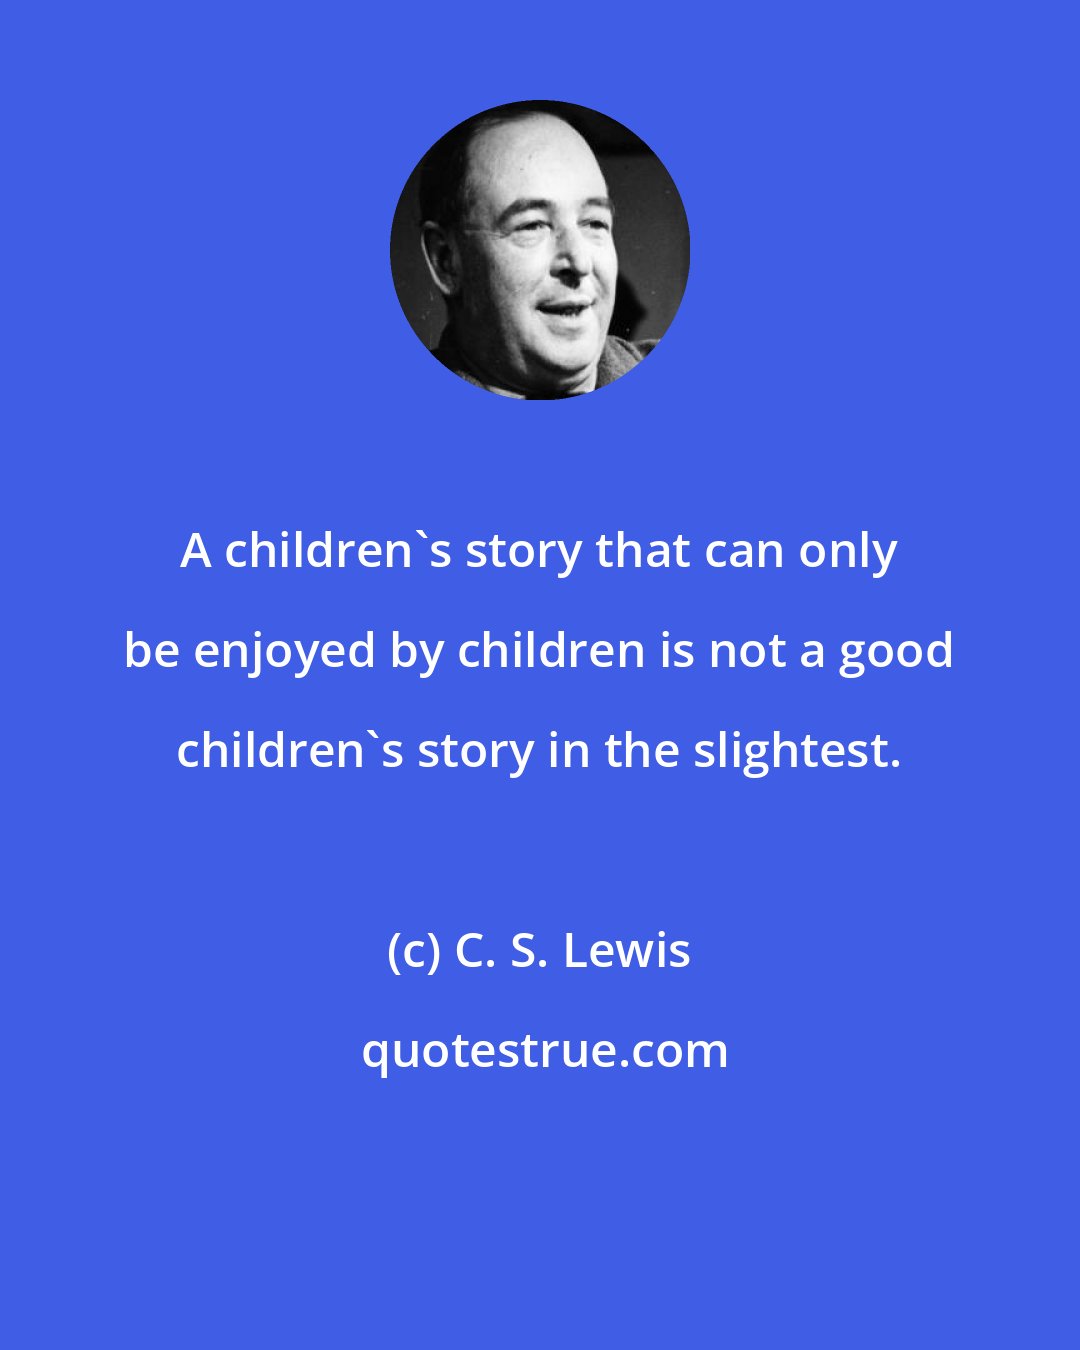 C. S. Lewis: A children's story that can only be enjoyed by children is not a good children's story in the slightest.